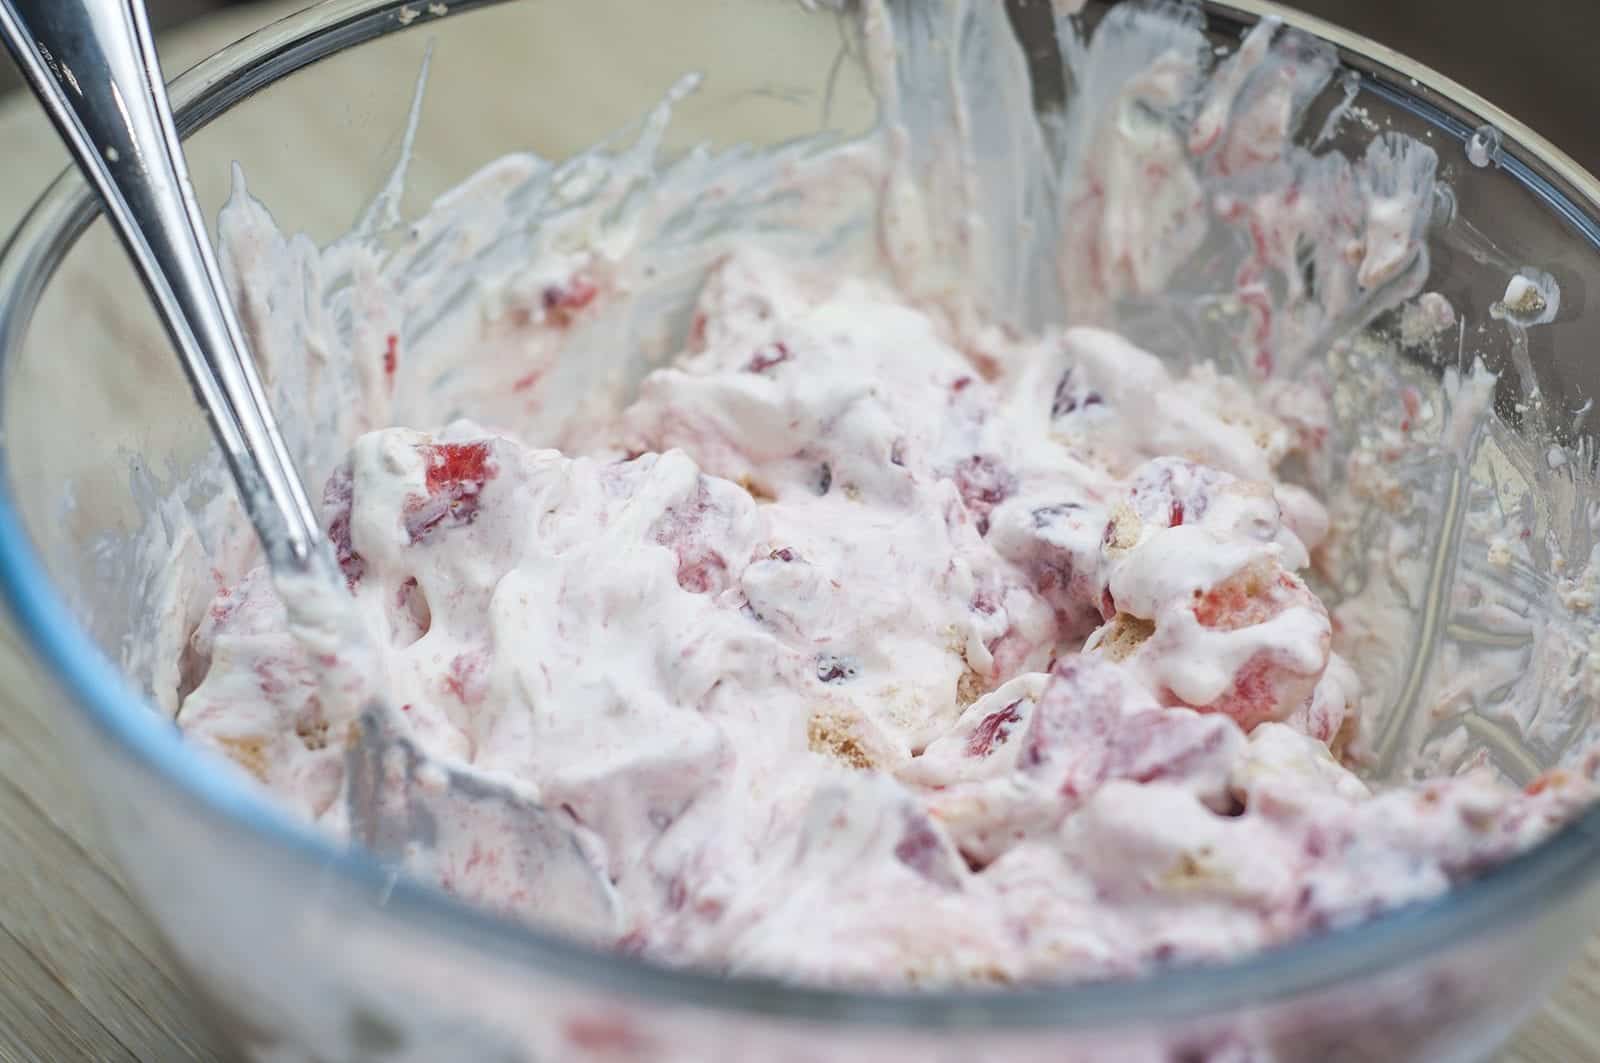 Eton mess is a quintessentially English decadent dessert of strawberries, meringue and whipped cream. Exceedingly nice but also dangerously naughty... Yum! | theyumyumclub.com